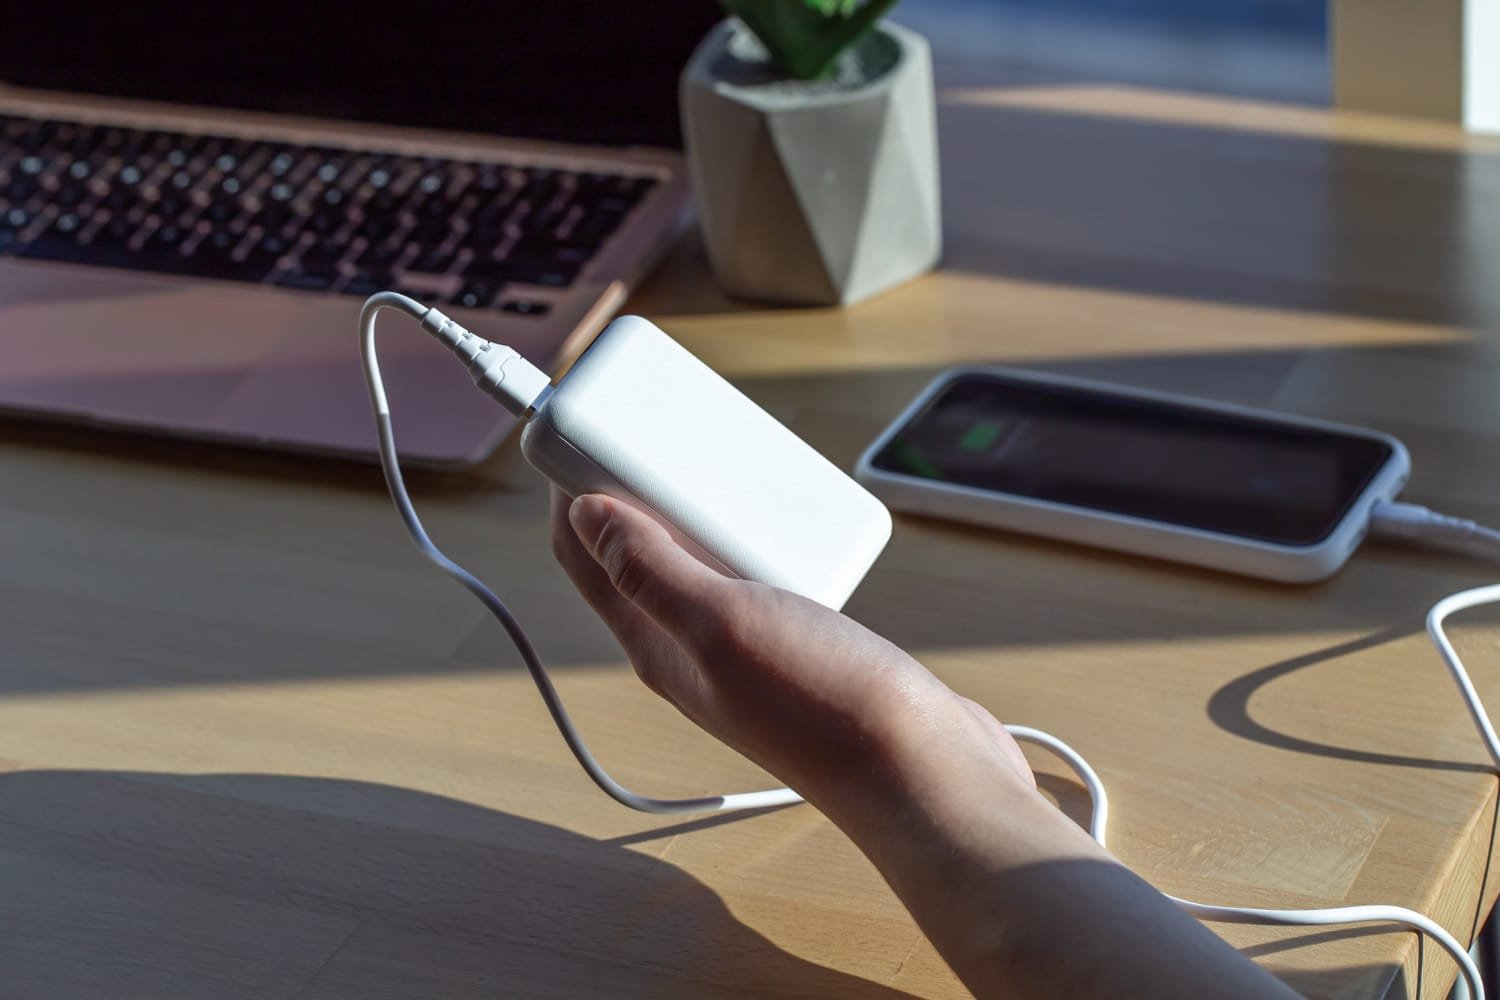 Power Up Your Devices With Anker Technologies’s Reliable Charging Solutions